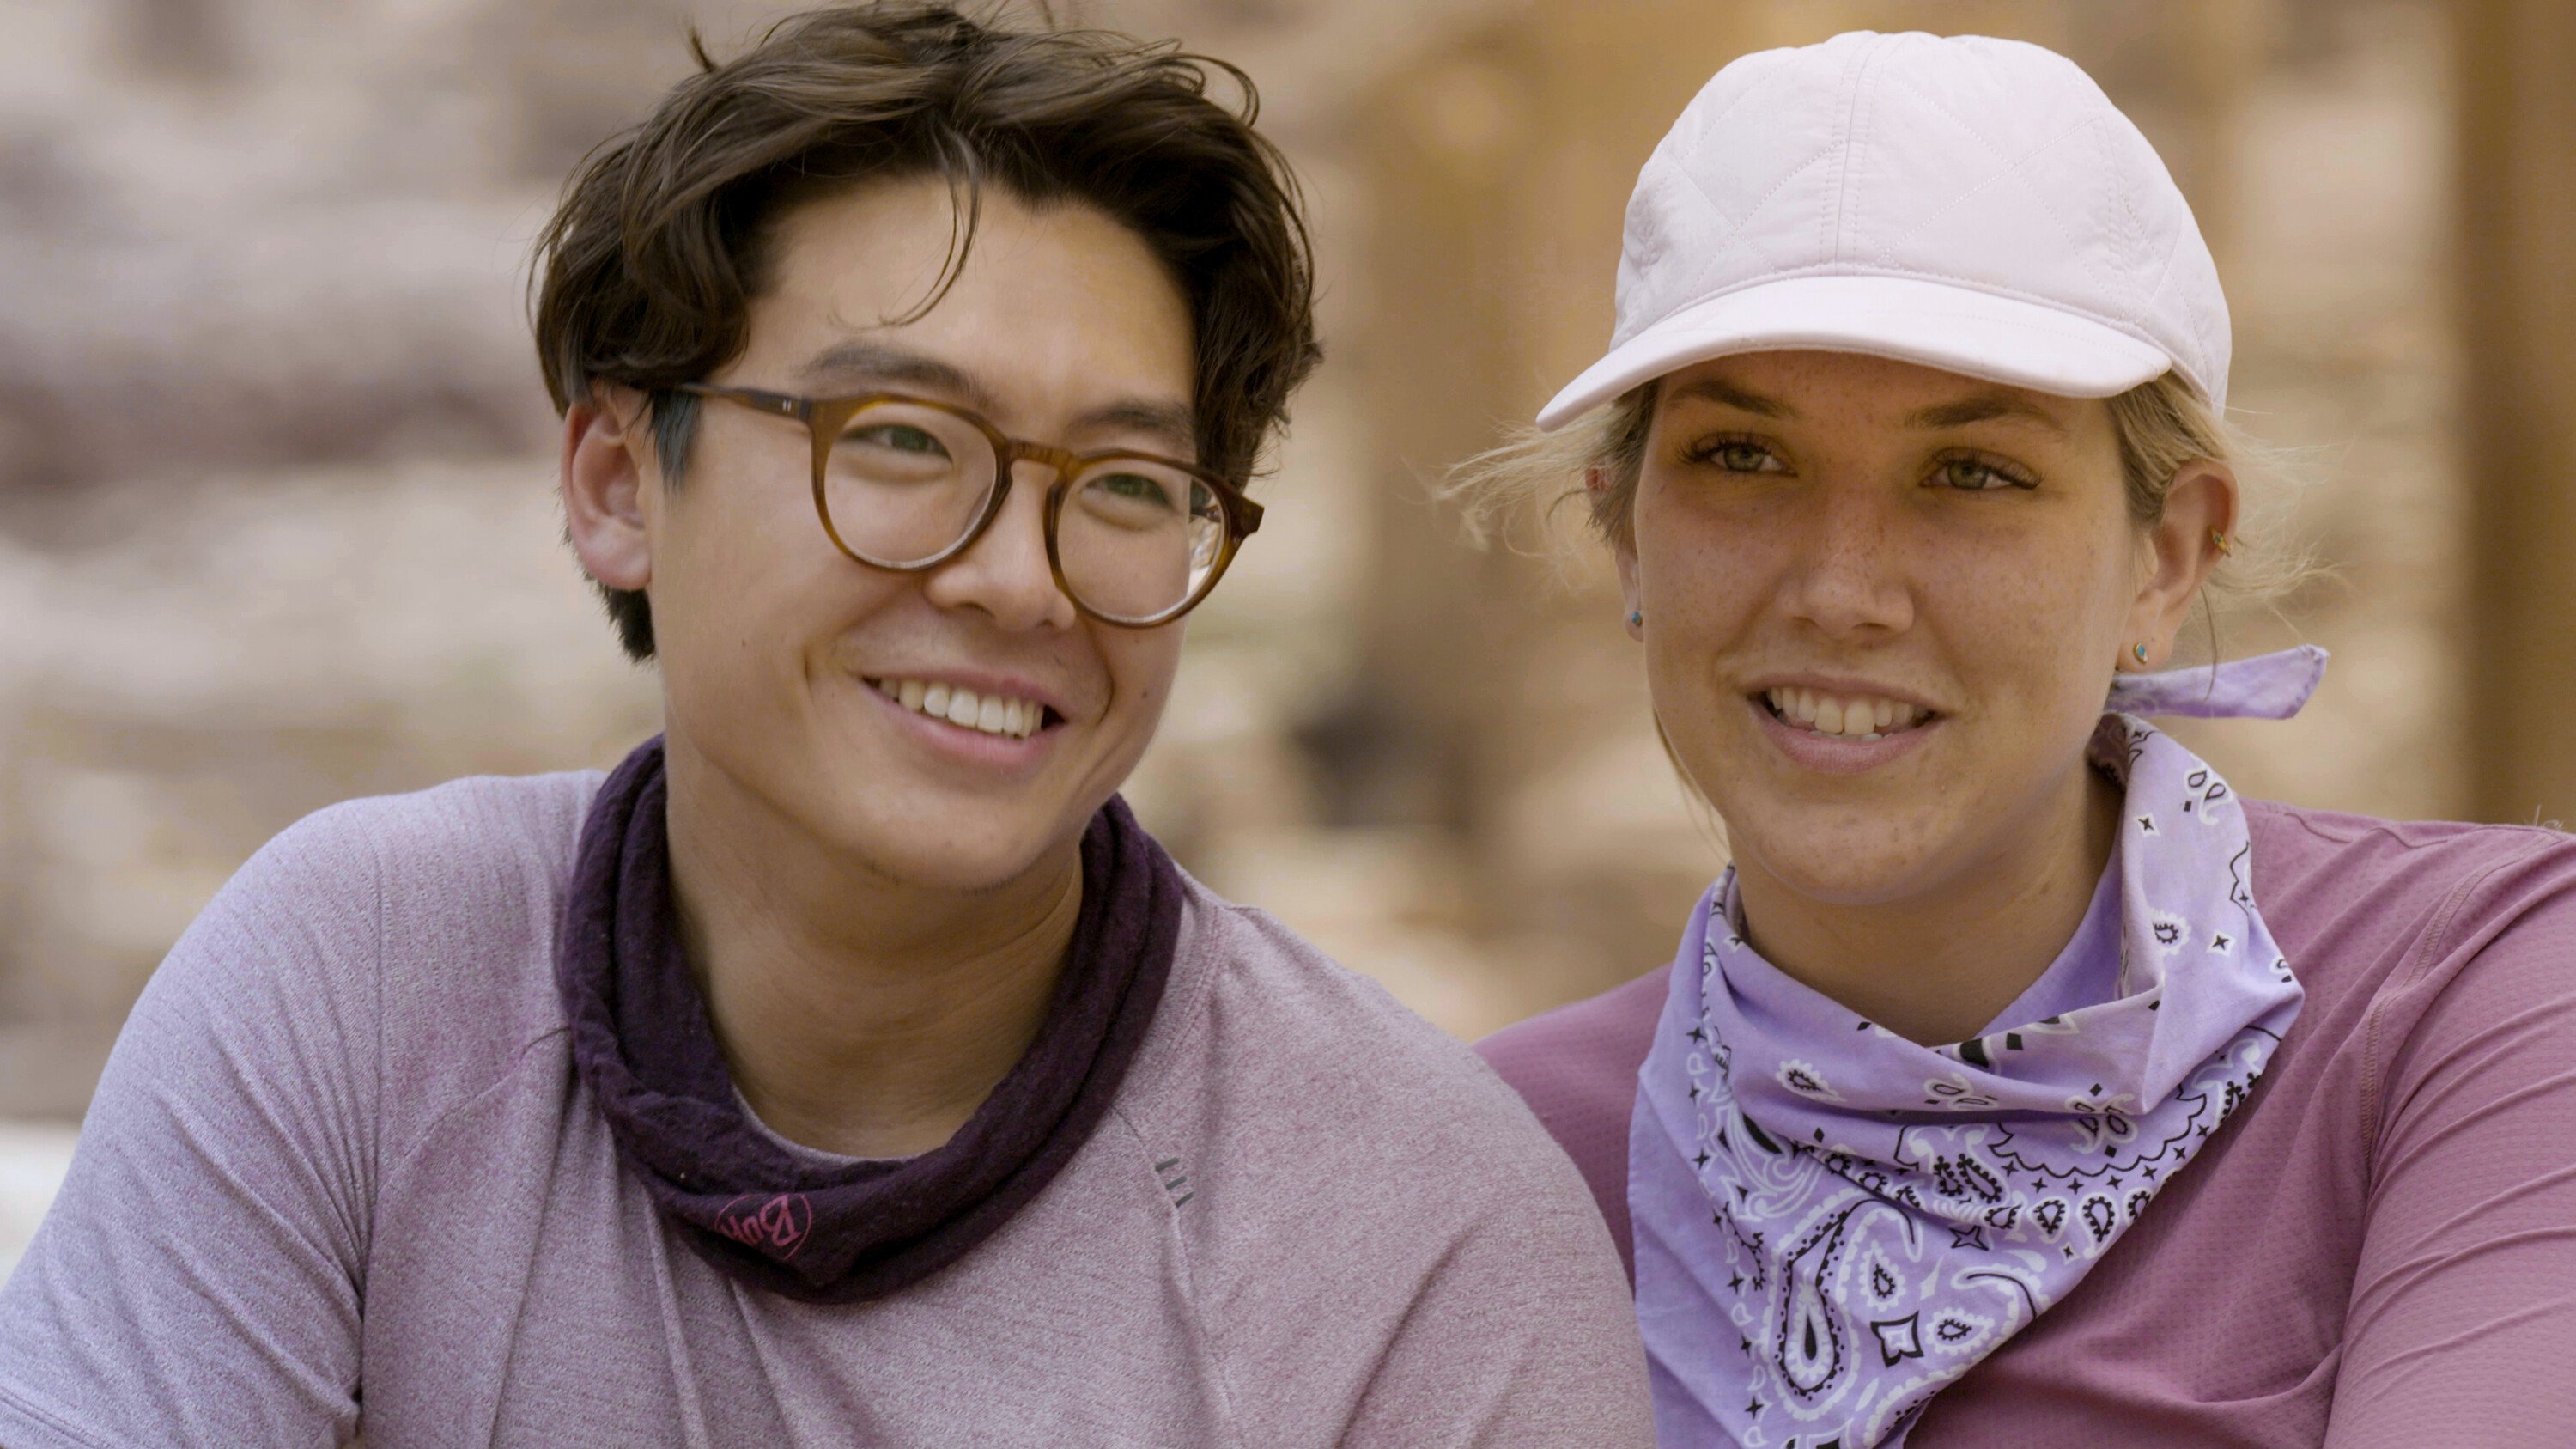 Derek Xiao and Claire Rehfuss, who starred in 'The Amazing Race' Season 34 Episode 5 on CBS, film a confessional. Derek wears a light purple shirt, dark purple band around his neck, and glasses. Claire wears a purple long-sleeved shirt, purple bandana, and light purple baseball cap.